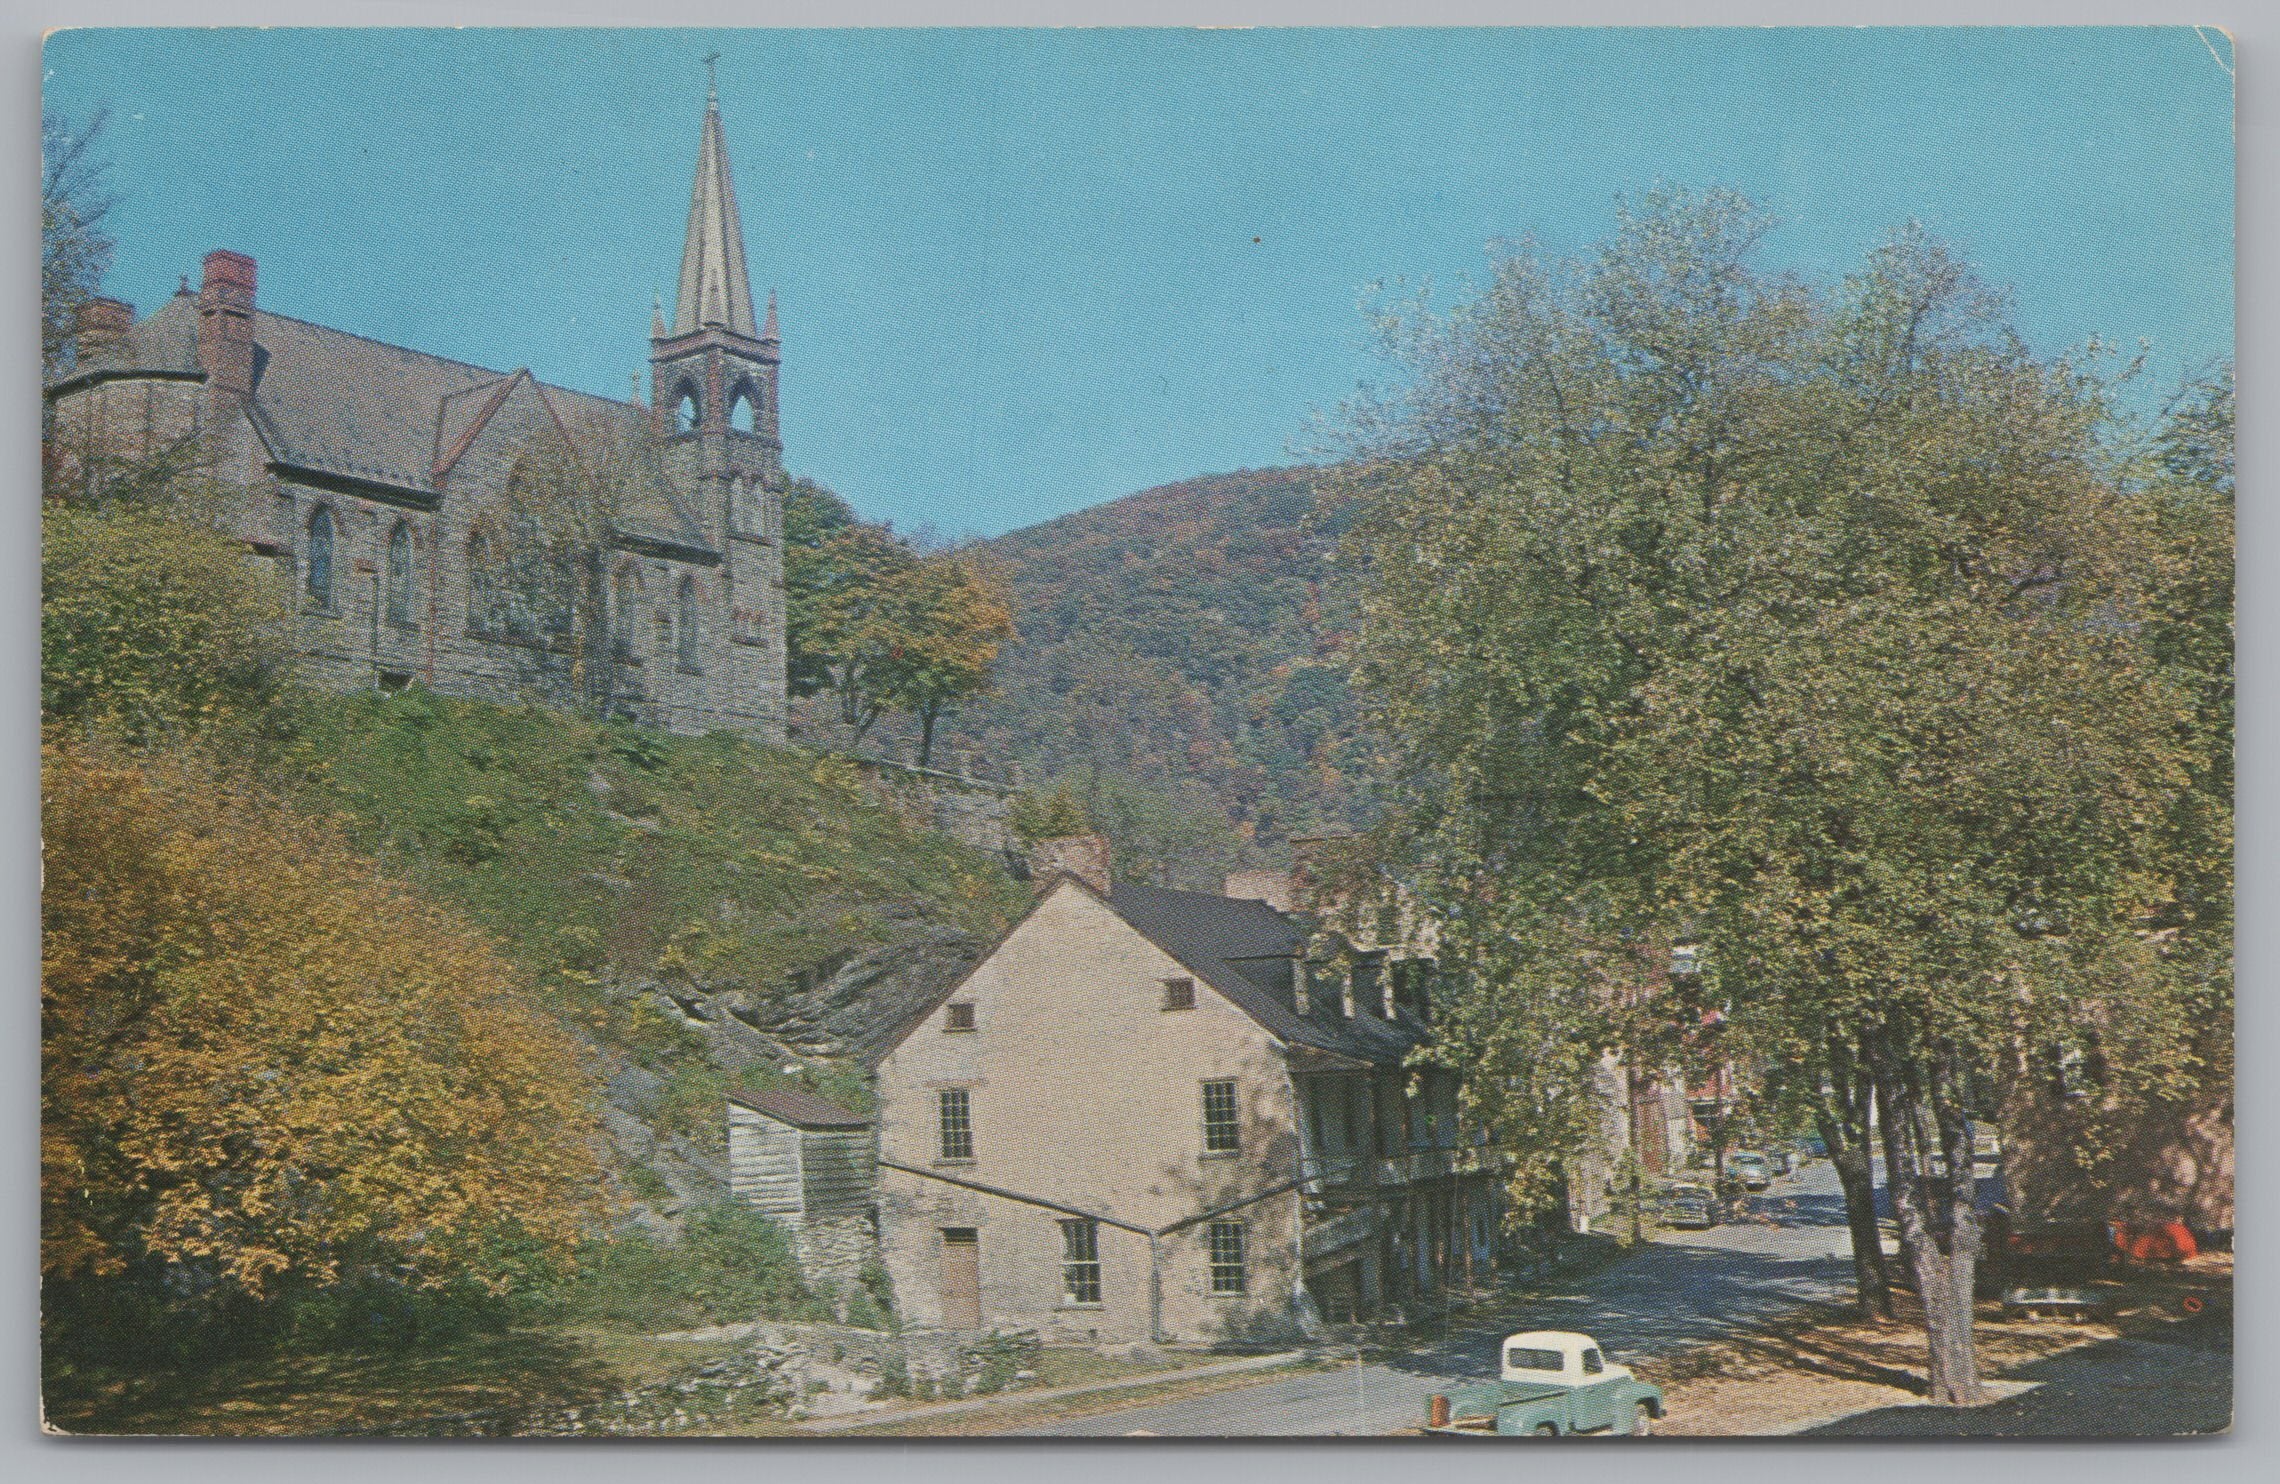 The Stage Coach Inn, Harpers Ferry West Virginia, Vintage Post Card.